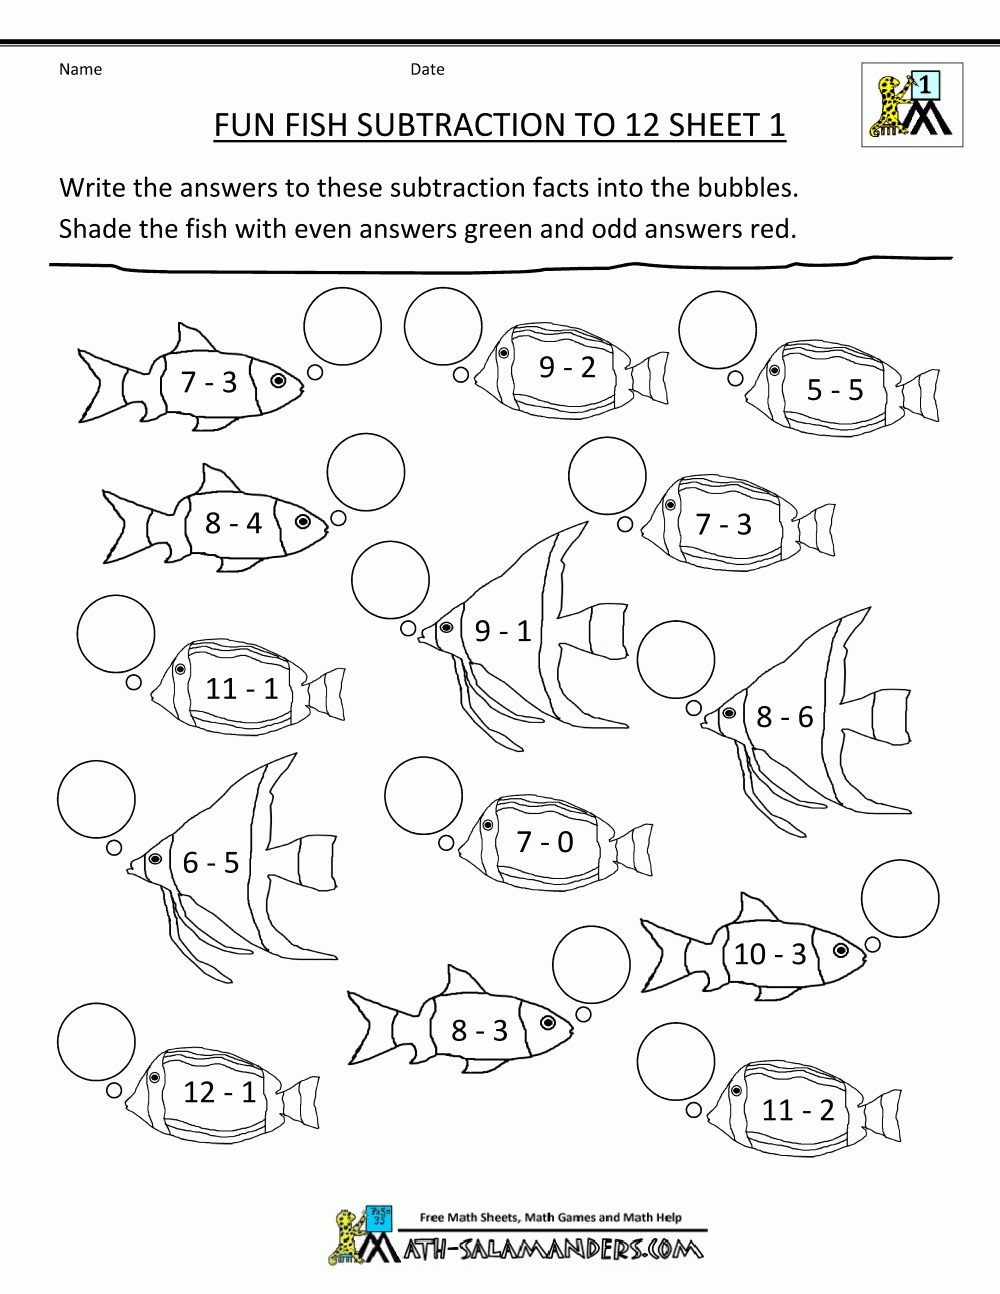 Math Coloring Pages 3Rd Grade | Math Coloring Sheets Fun Subtraction with 1St Grade Math Coloring Sheets